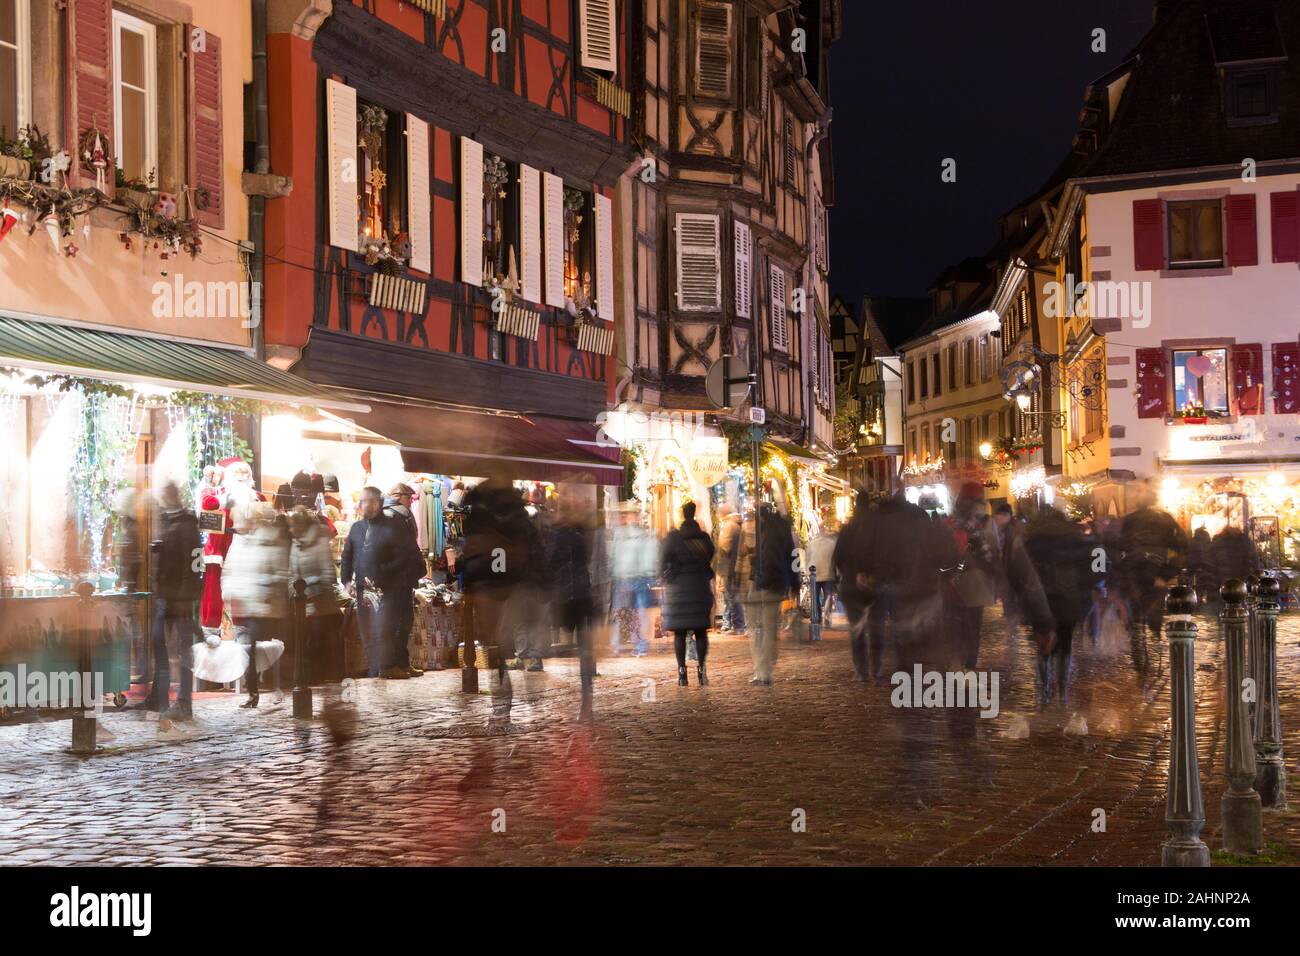 Shoppers on street captured using slow shutter speed during Christmas market in Alsace, France Stock Photo